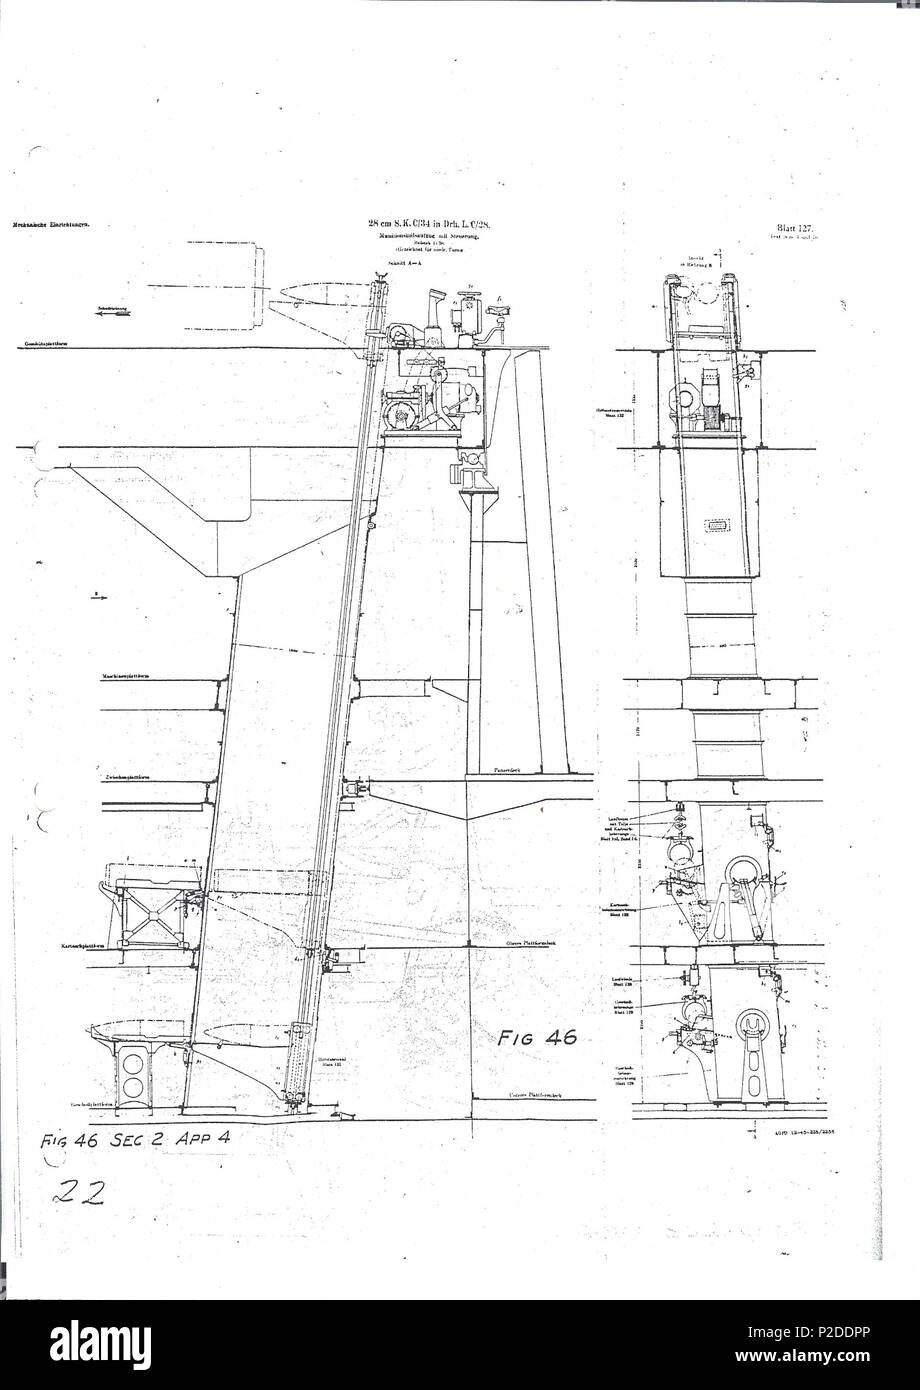 . This is a drawing of the «munitionsaufzug» (ammunition lift) for the German 28 cm Schiffskanone C/34 gun, designed for the Dhr. L. C/28 armored turret. The C/34 guns were placed in the Dhr. C/28 gun turret, originally on the ships «Scharnhorst» and «Gneisenau». «Gneisenau» was damaged in an aerial attack in 1942, and her guns were placed ashore, at costal batteries. Two of the turrets, with at total of six guns, were placed in Norway, at Austrått and Fjell, of which the one at Austrått still remains as a museum today. The third turret was placed in Holland. Unknown date. Krupp. 52 Sk c 34 mu Stock Photo